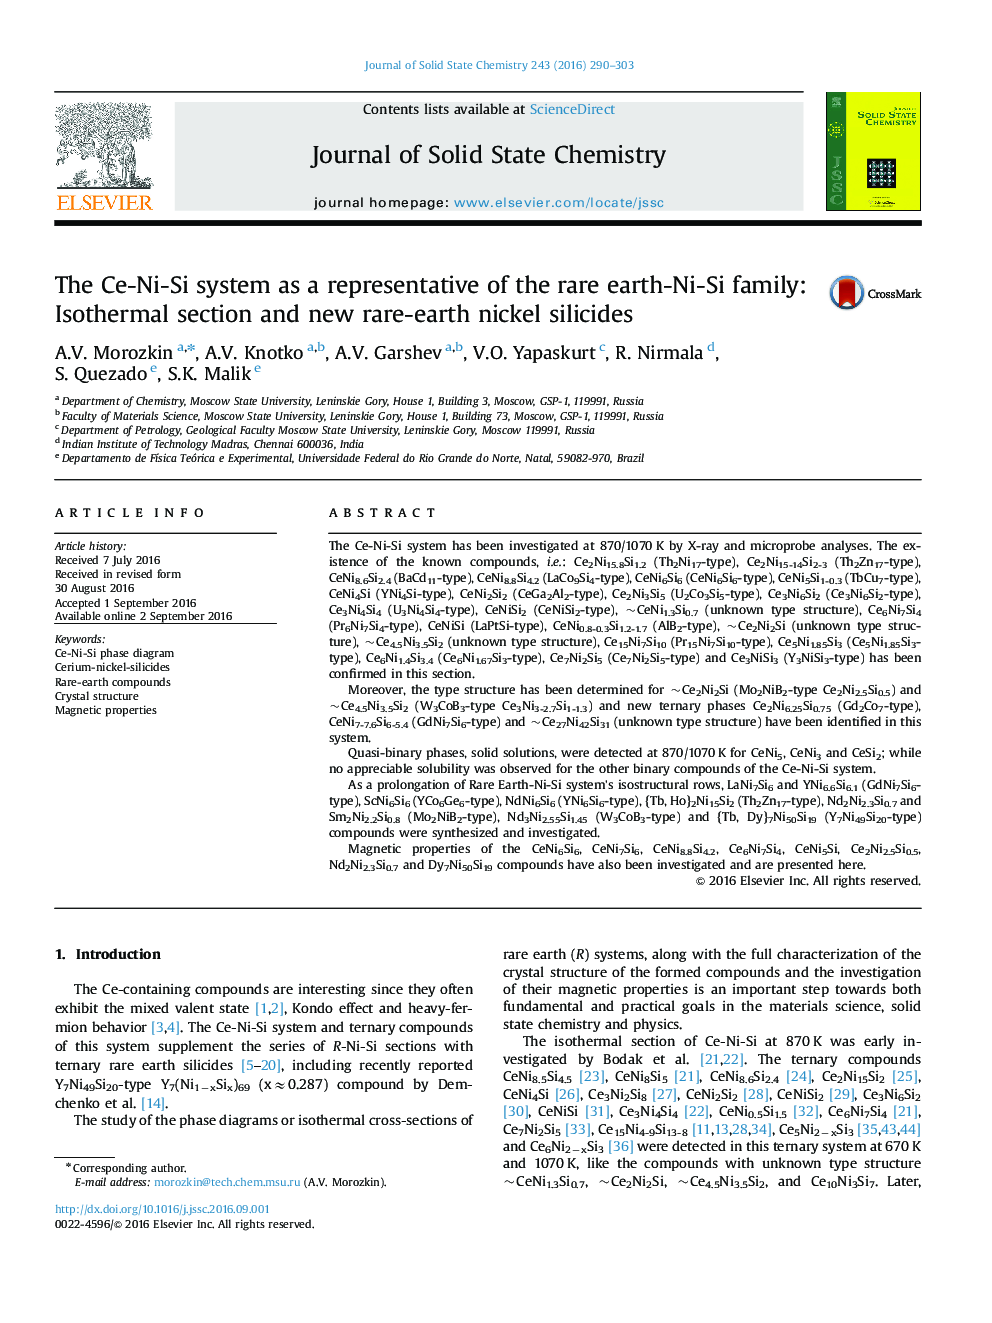 The Ce-Ni-Si system as a representative of the rare earth-Ni-Si family: Isothermal section and new rare-earth nickel silicides